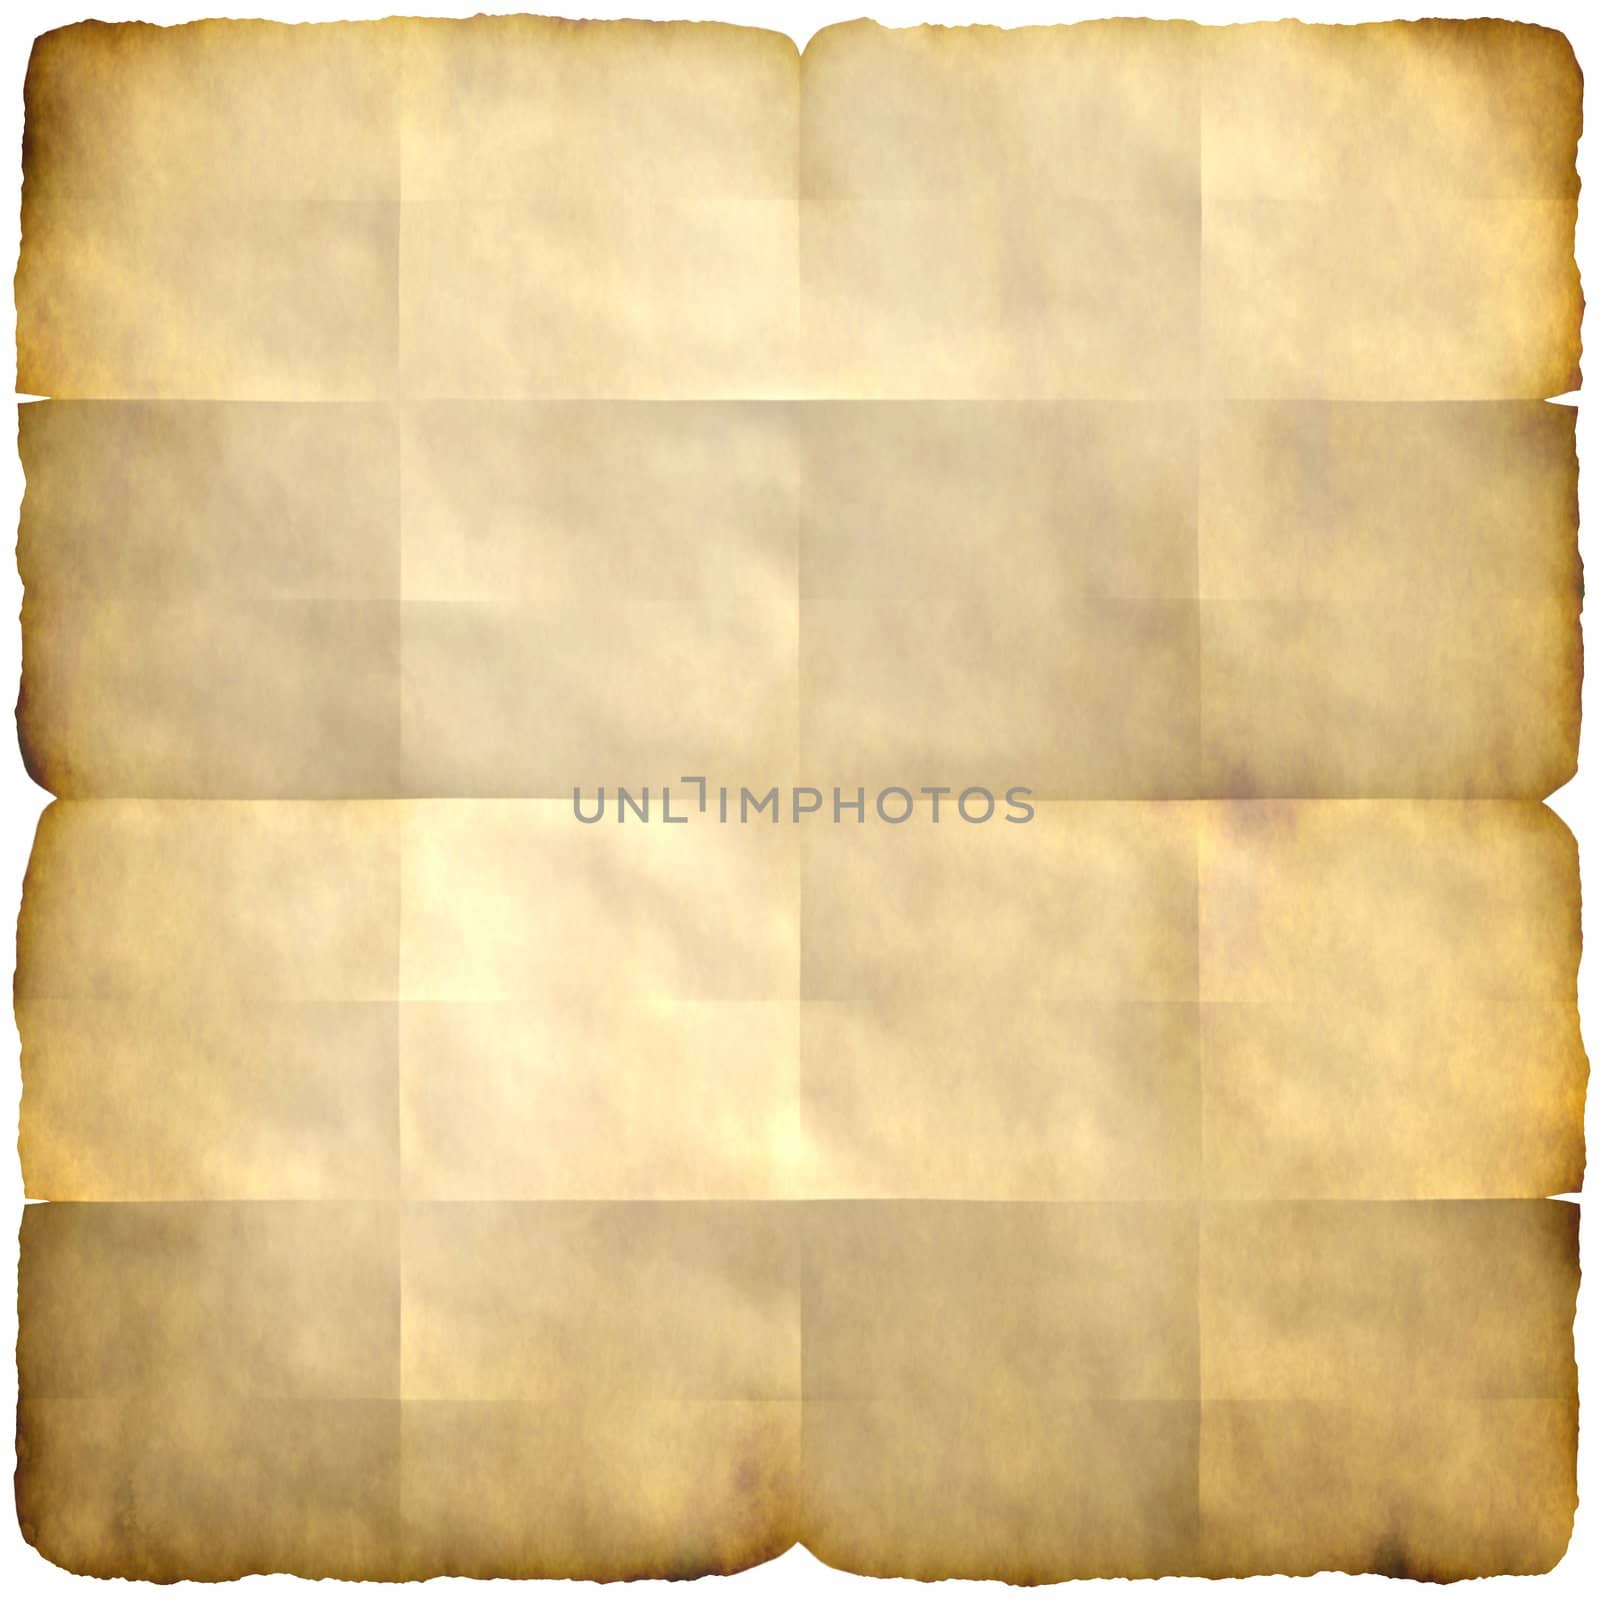 old paper with torn edges isolated on a white background